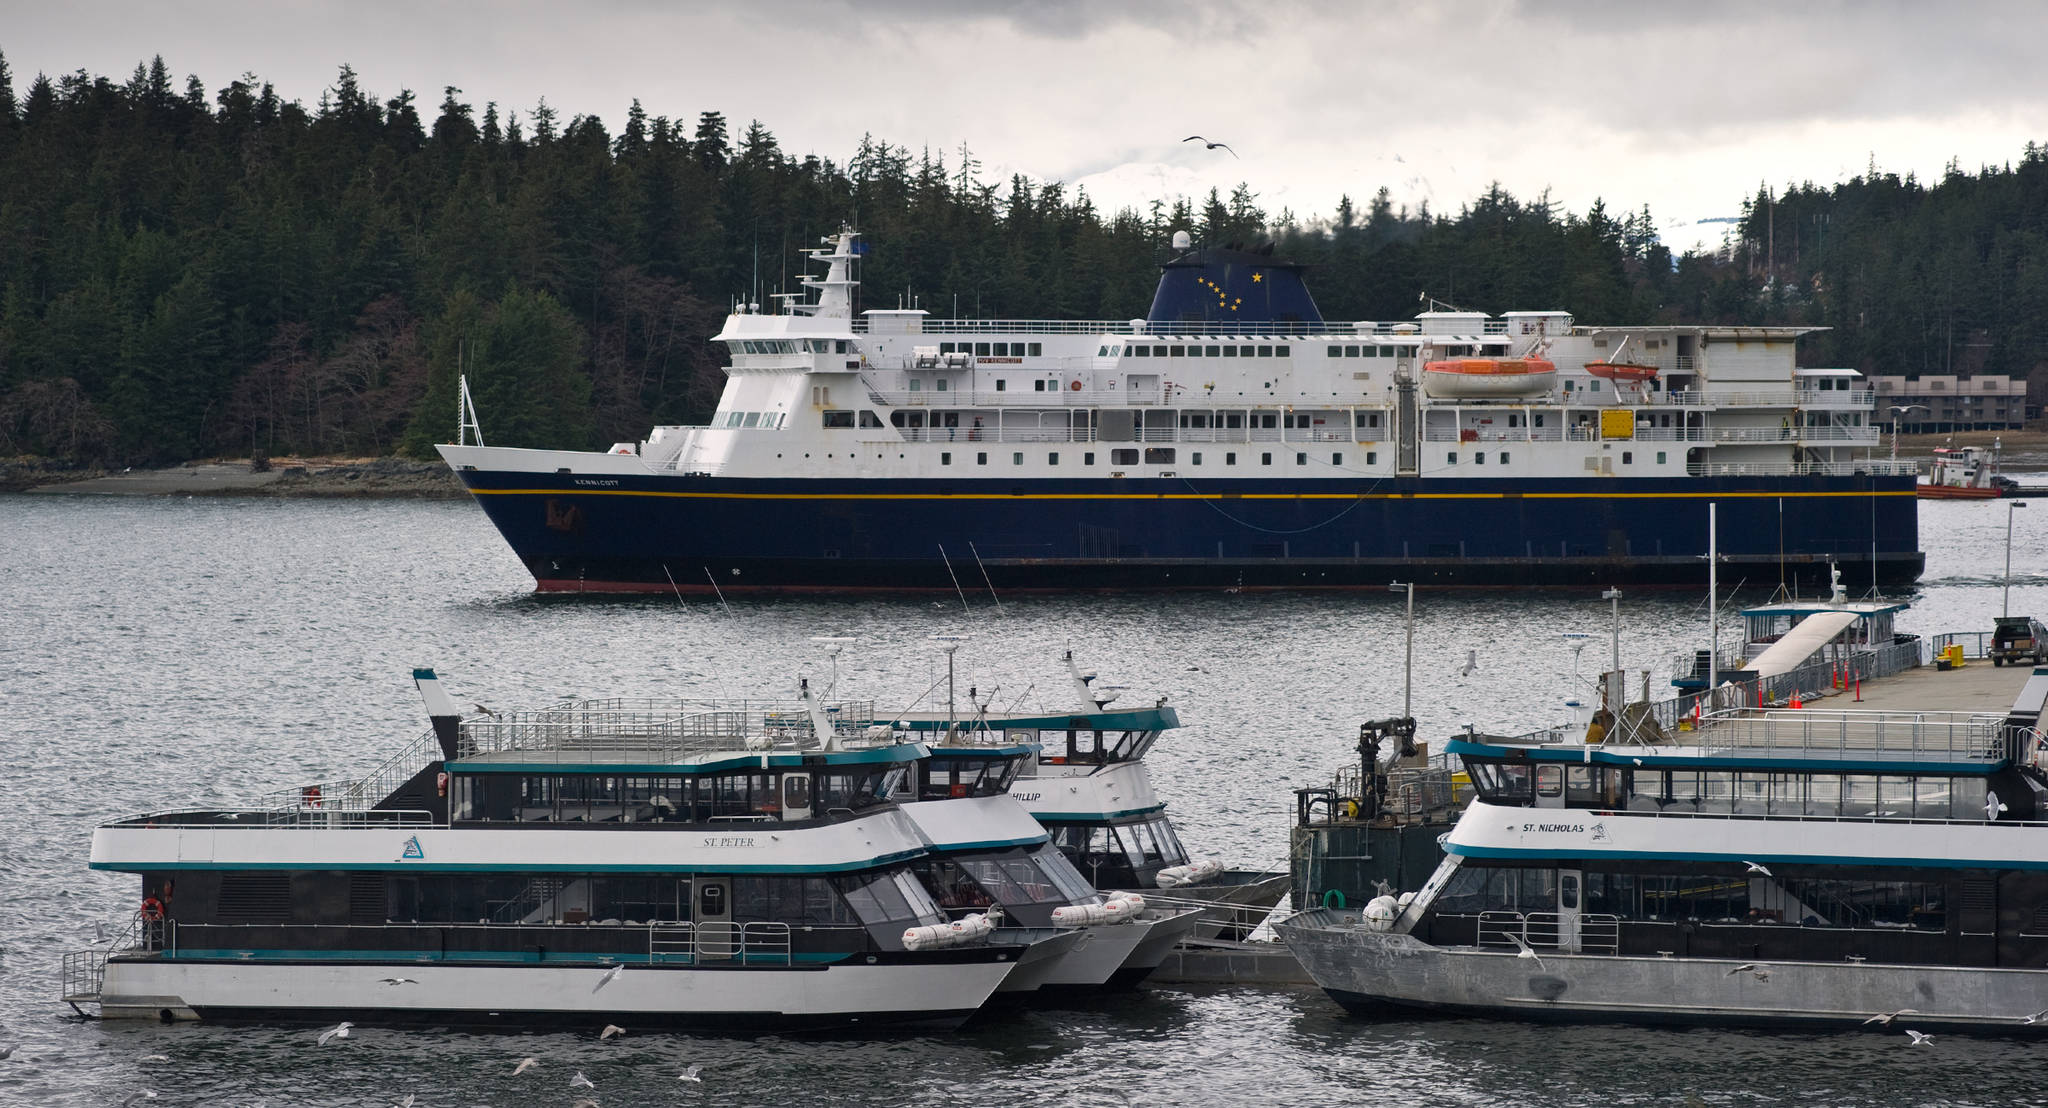 The Alaska Marine Highway System’s M/V Kennicott pulls away from the Auke Bay Ferry Terminal in this August 2014 photo. The Kennicott was the first vessel on the scene to help five Canadians who jumped into the water south of Bella Bella, British Columbia, Canada, to escape a sinking ship. (Michael Penn | Juneau Empire File)